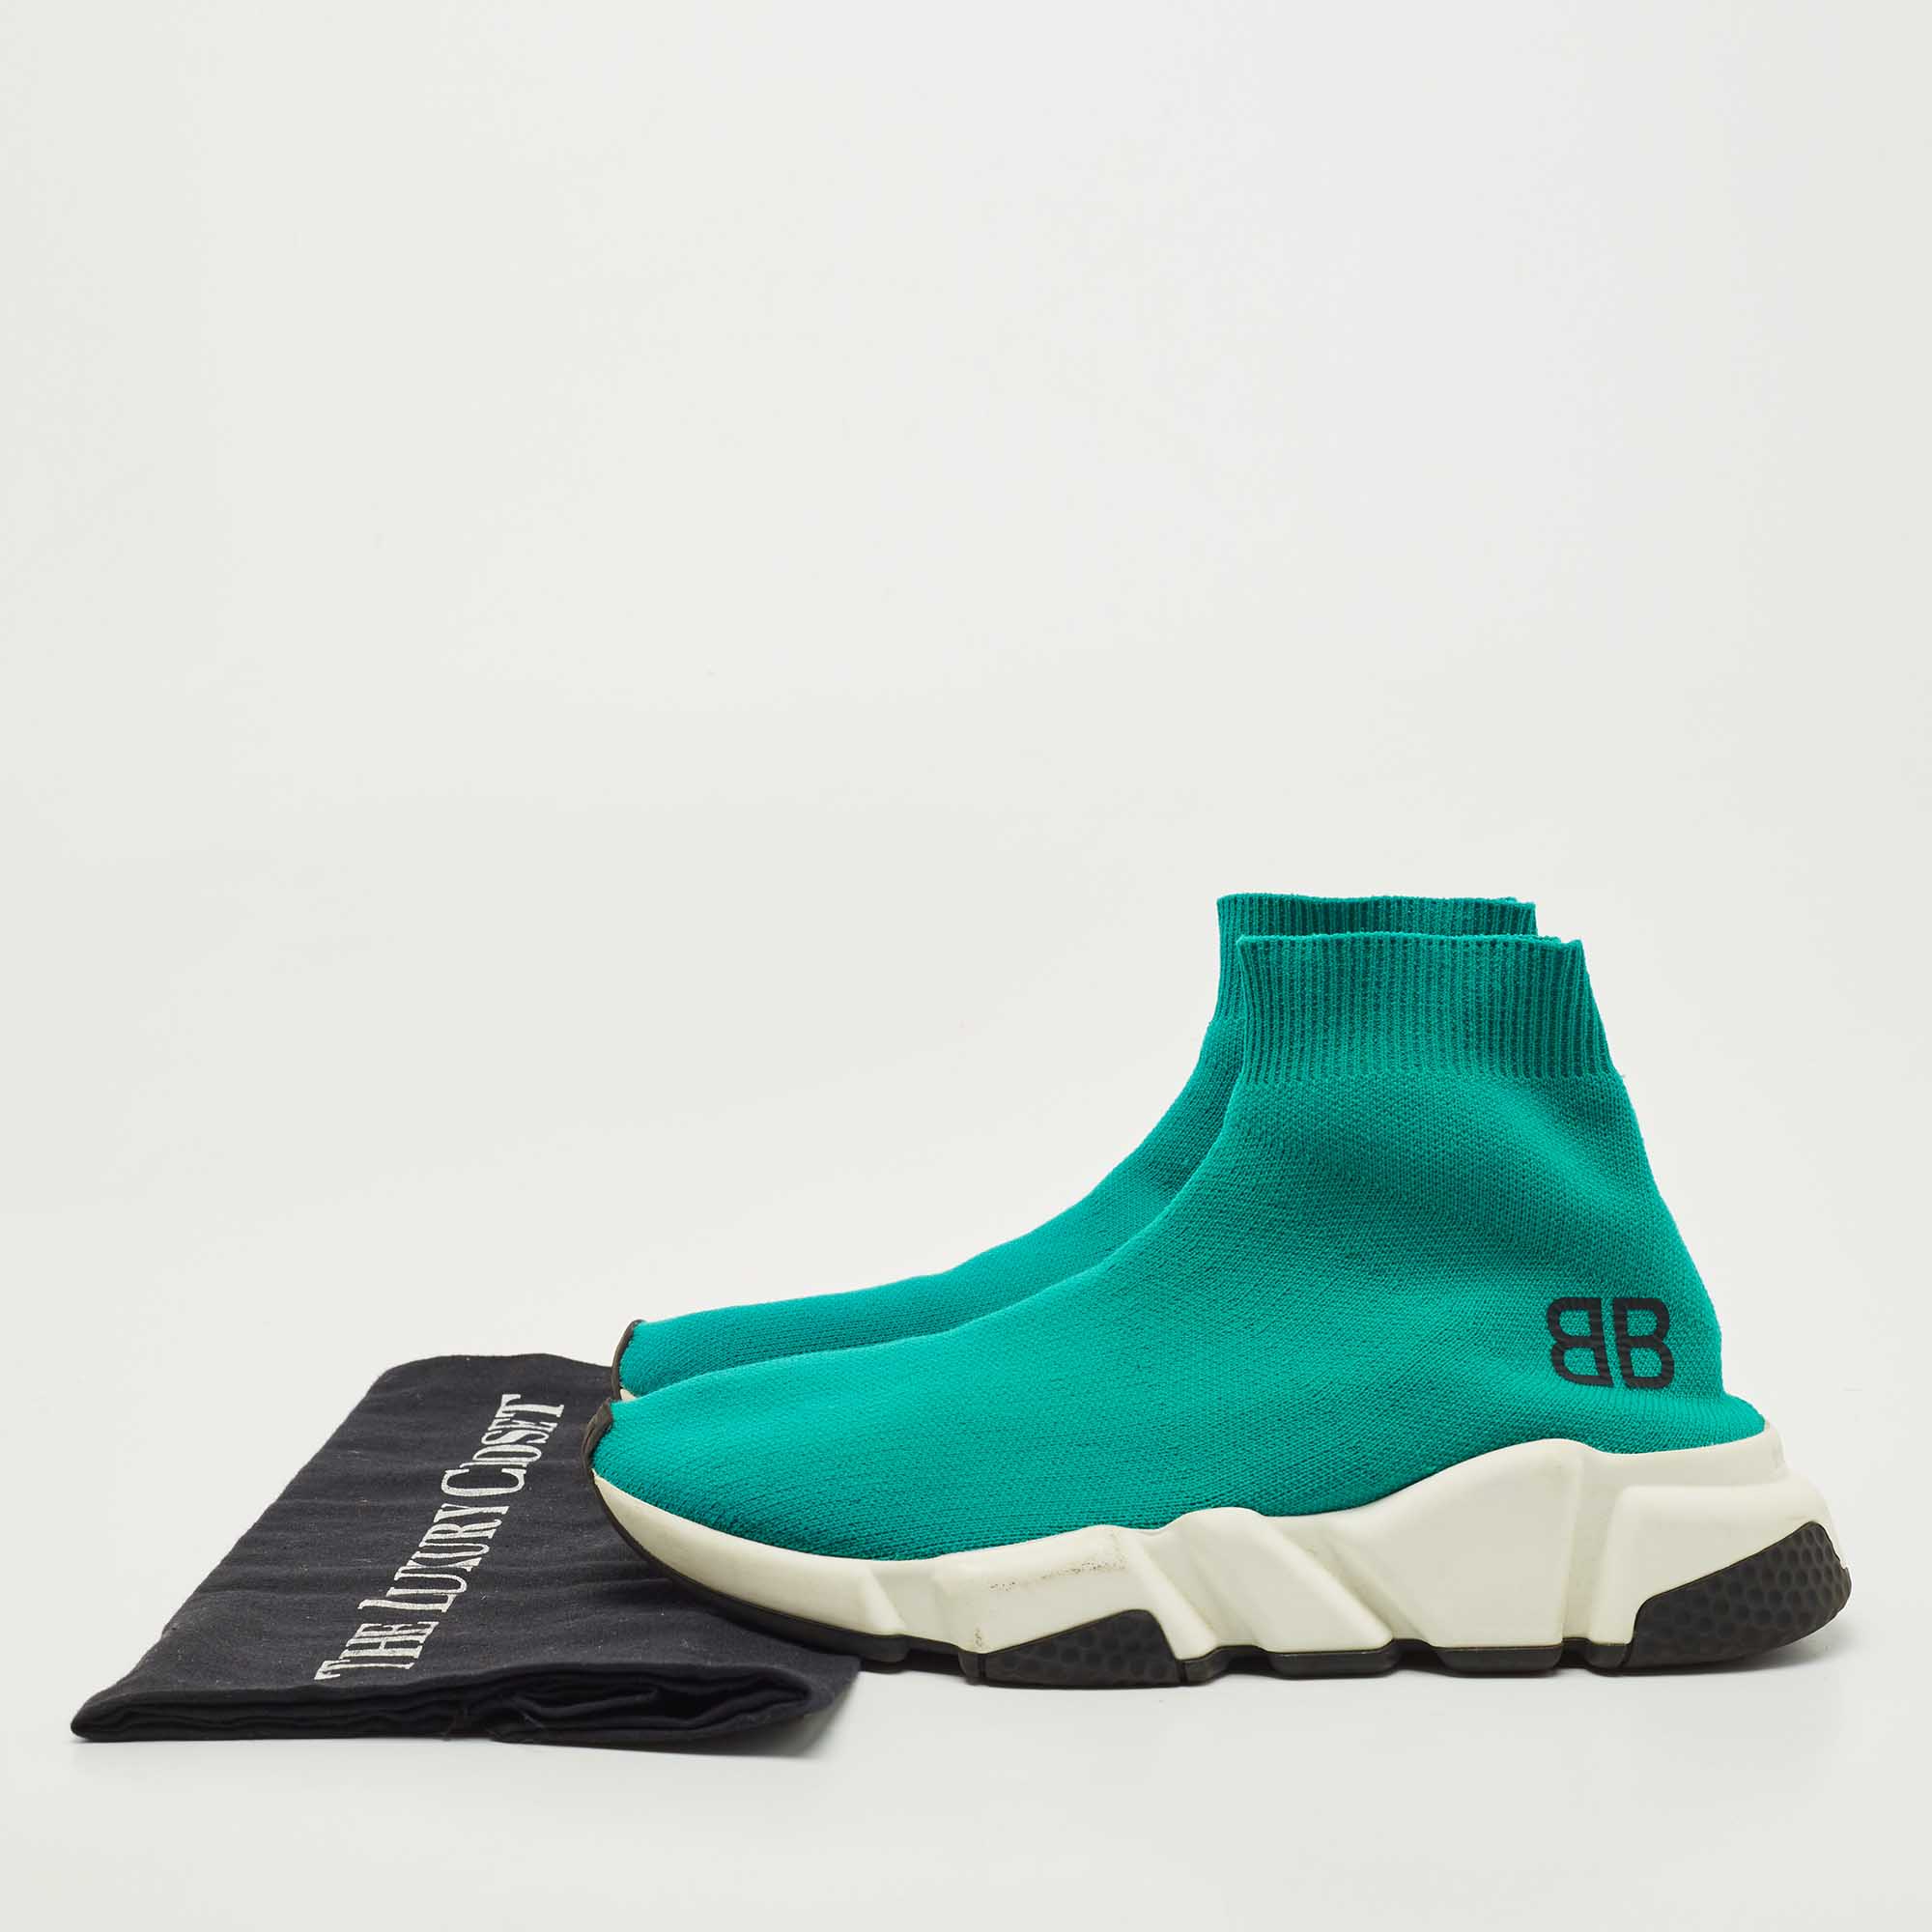 Balenciaga Turquoise Knit Fabric Speed Trainer Sneakers Size 35